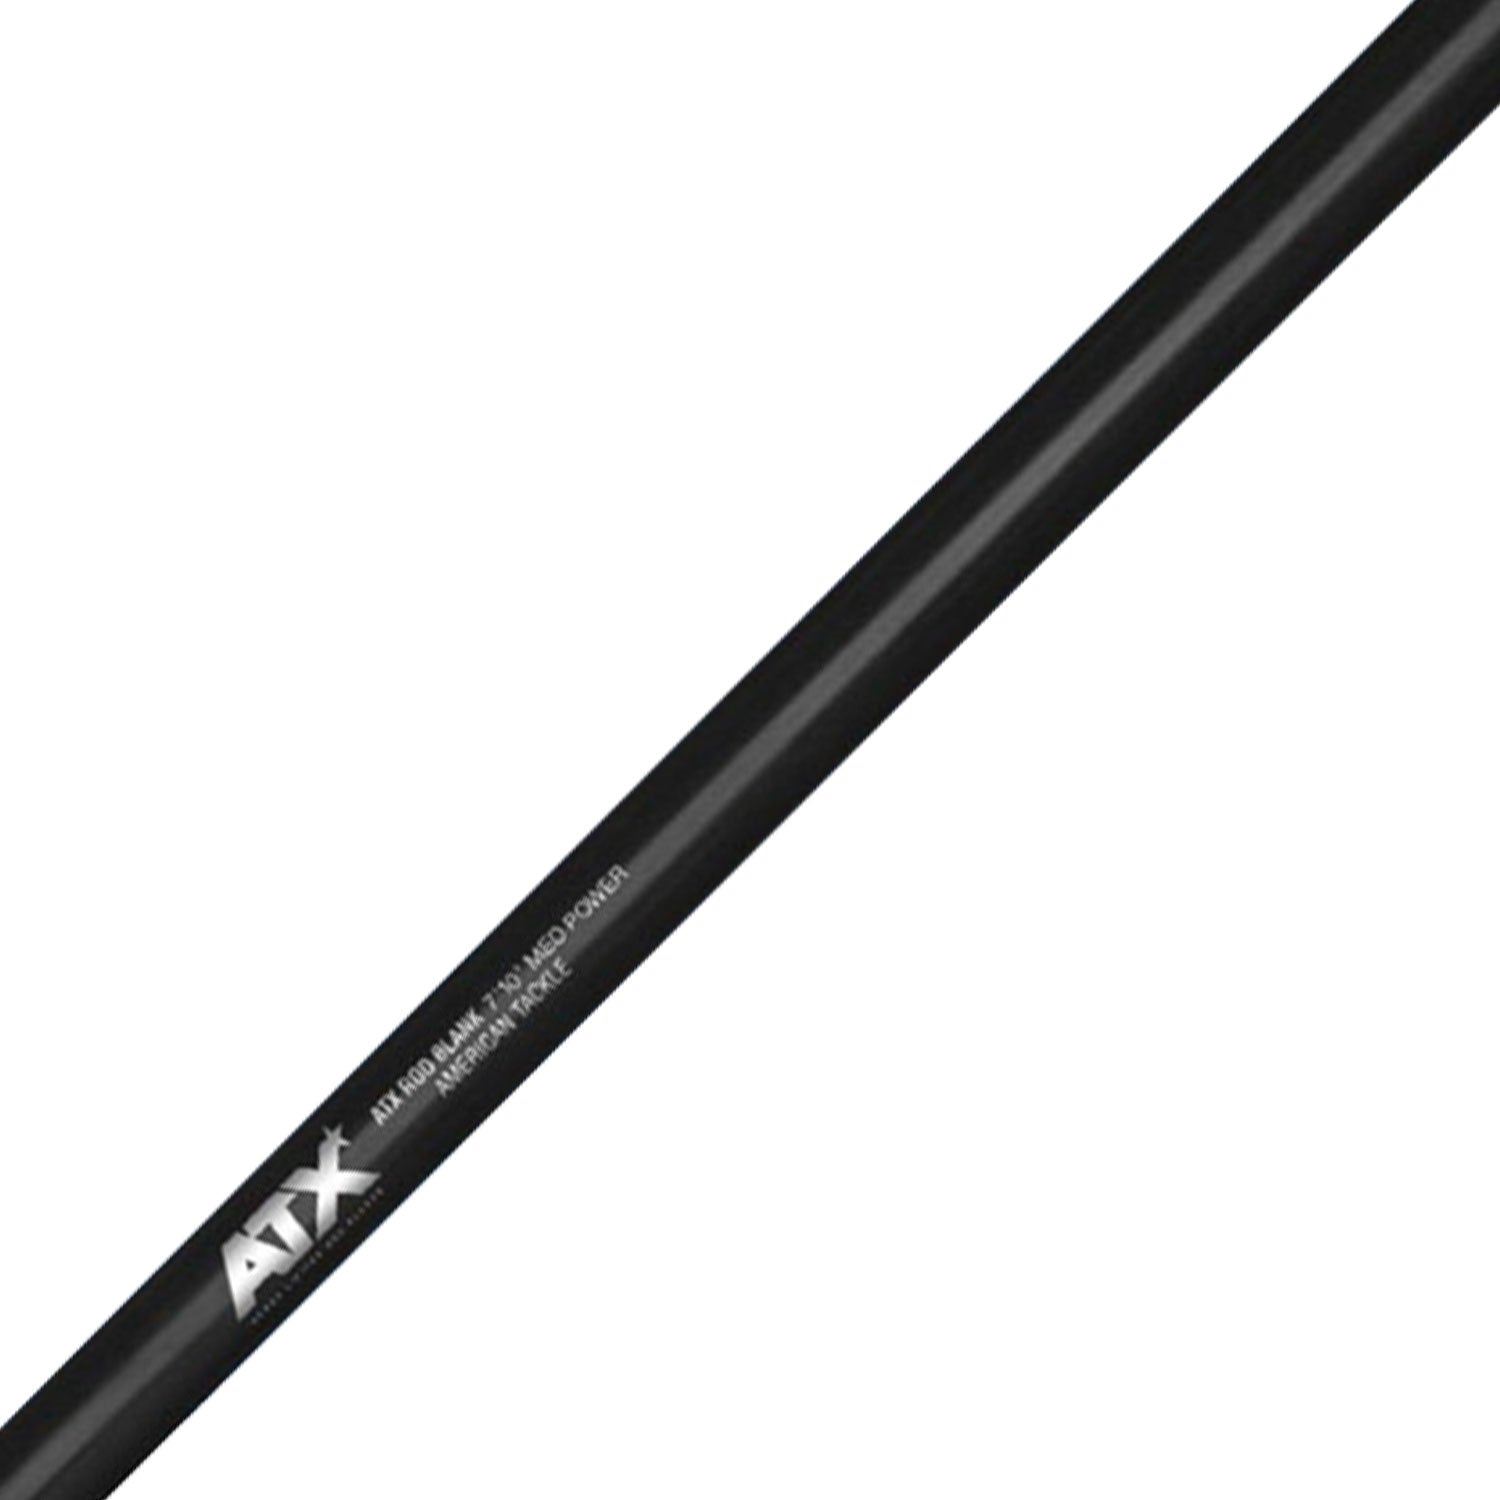 American Tackle AXST66XH Stand-Up Tuna Rod Blank